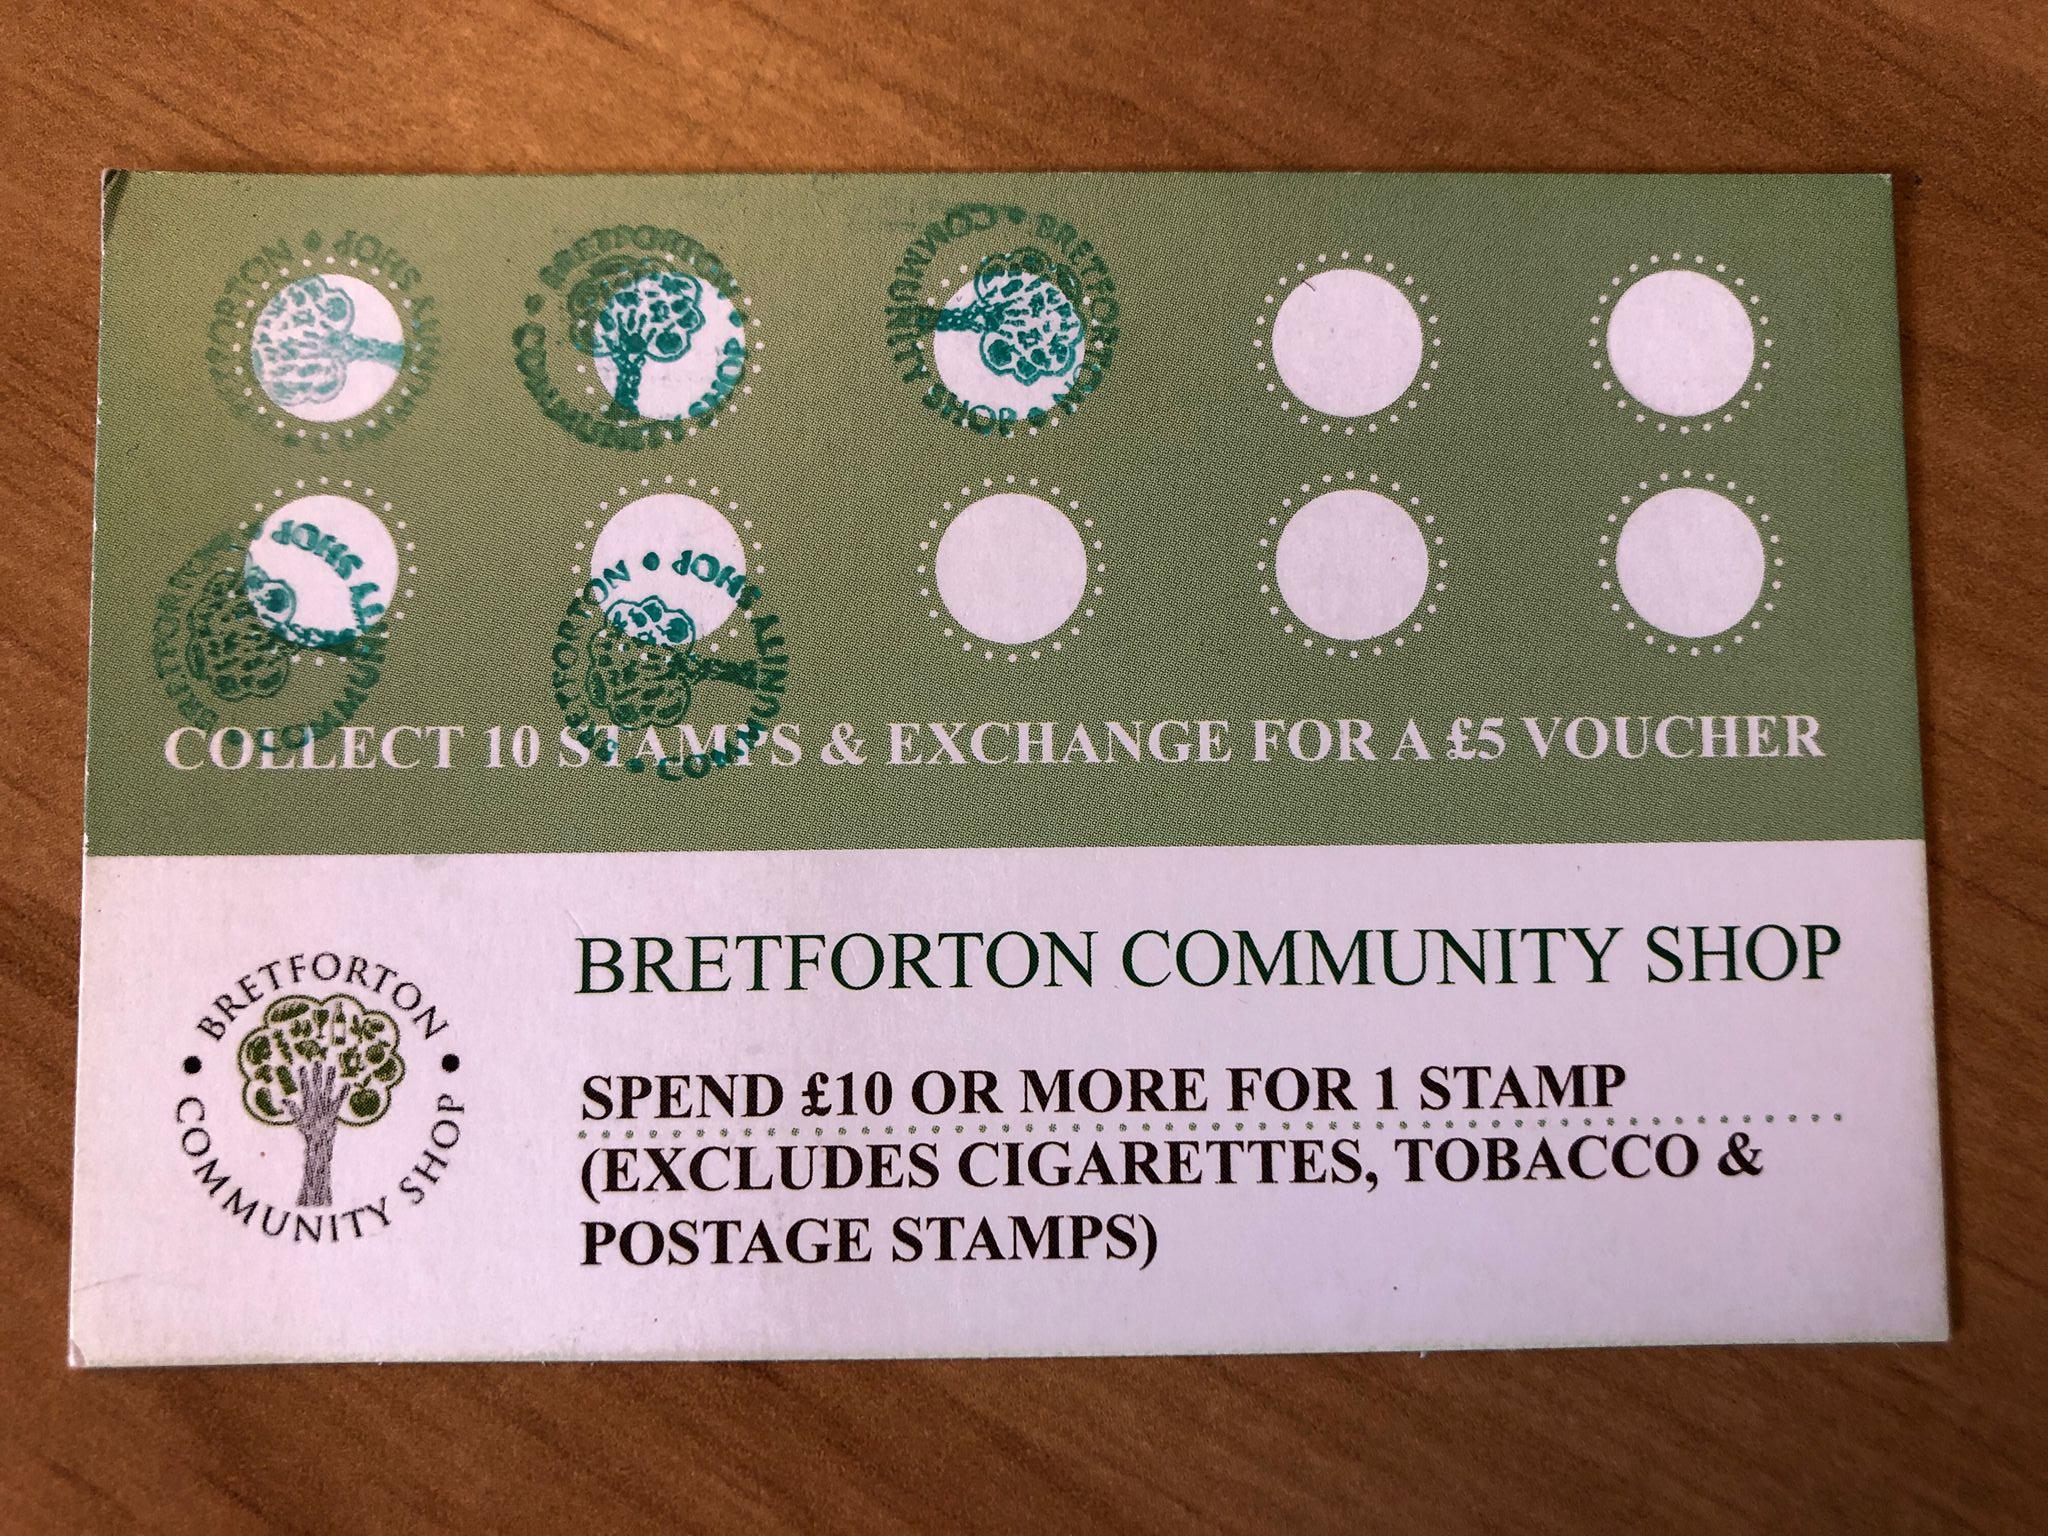 A photo of Bretforton Community Shop's loyalty card showing some stamps have been collected